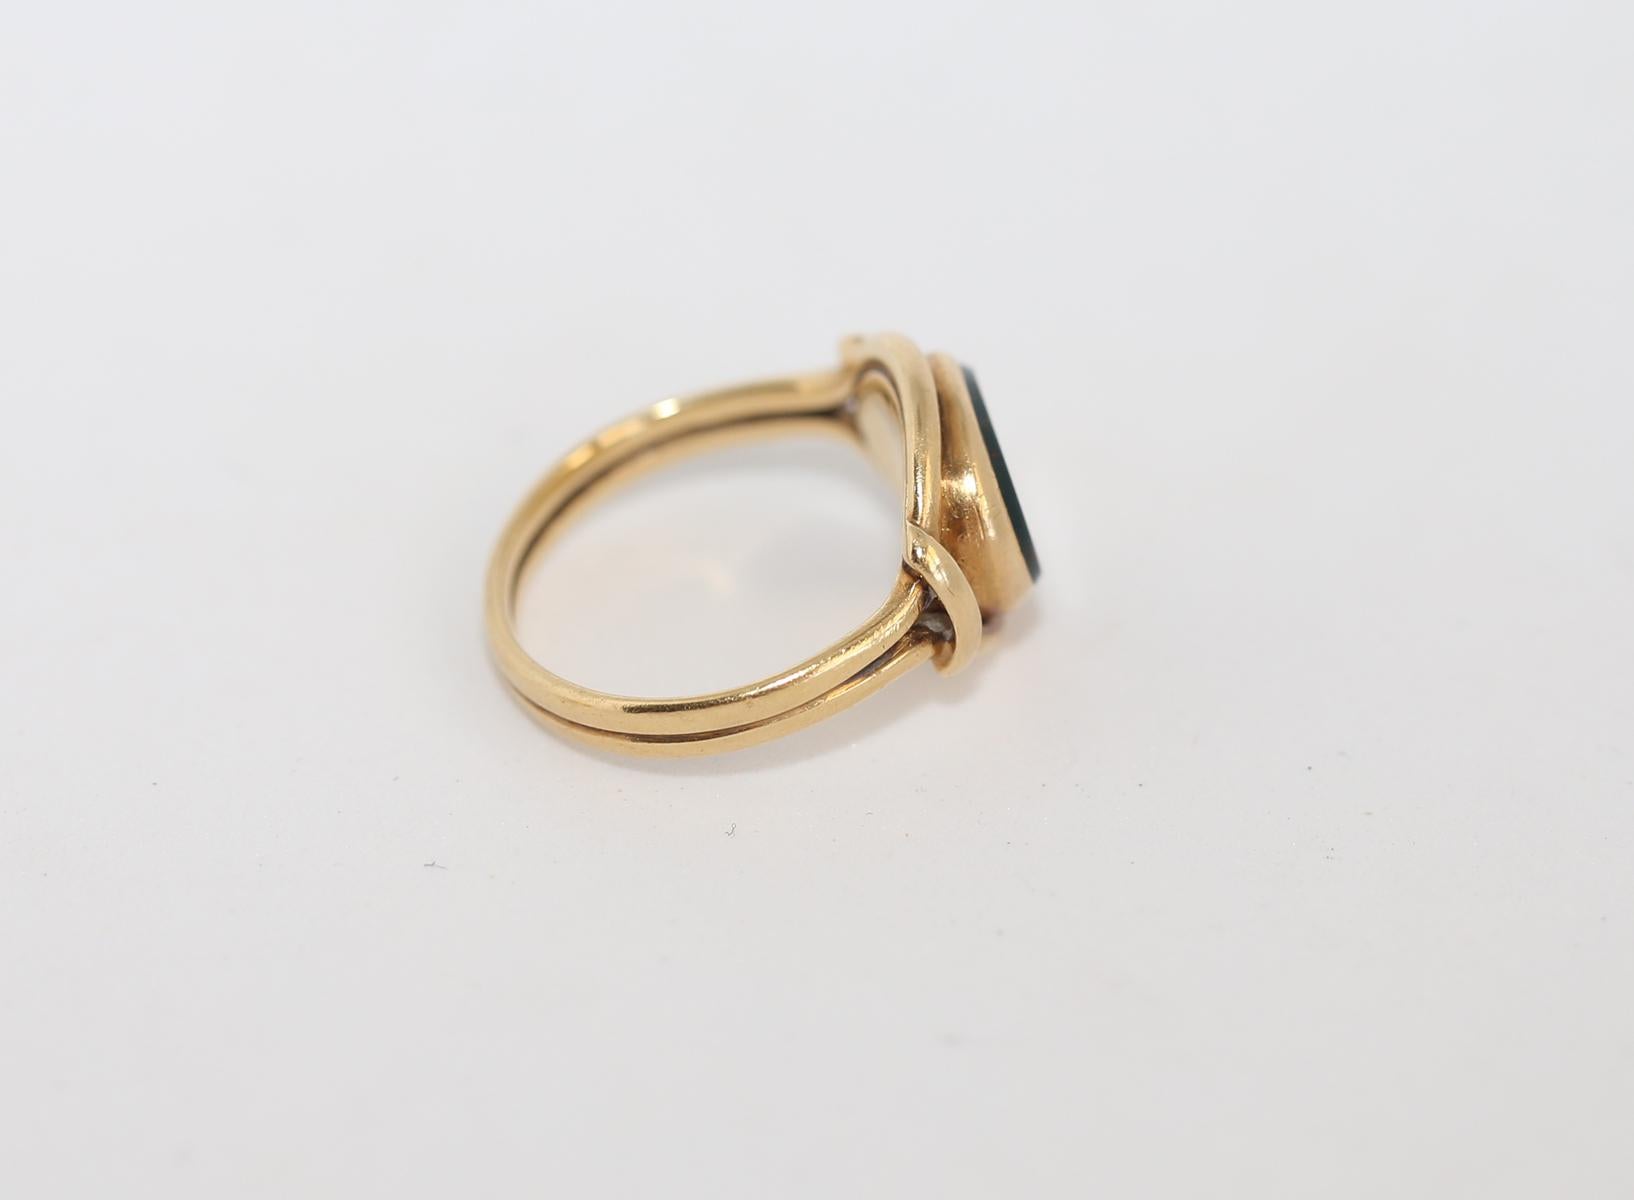 Women's or Men's Signet Bloodstone Yellow Gold Ring Unsigned, 1900